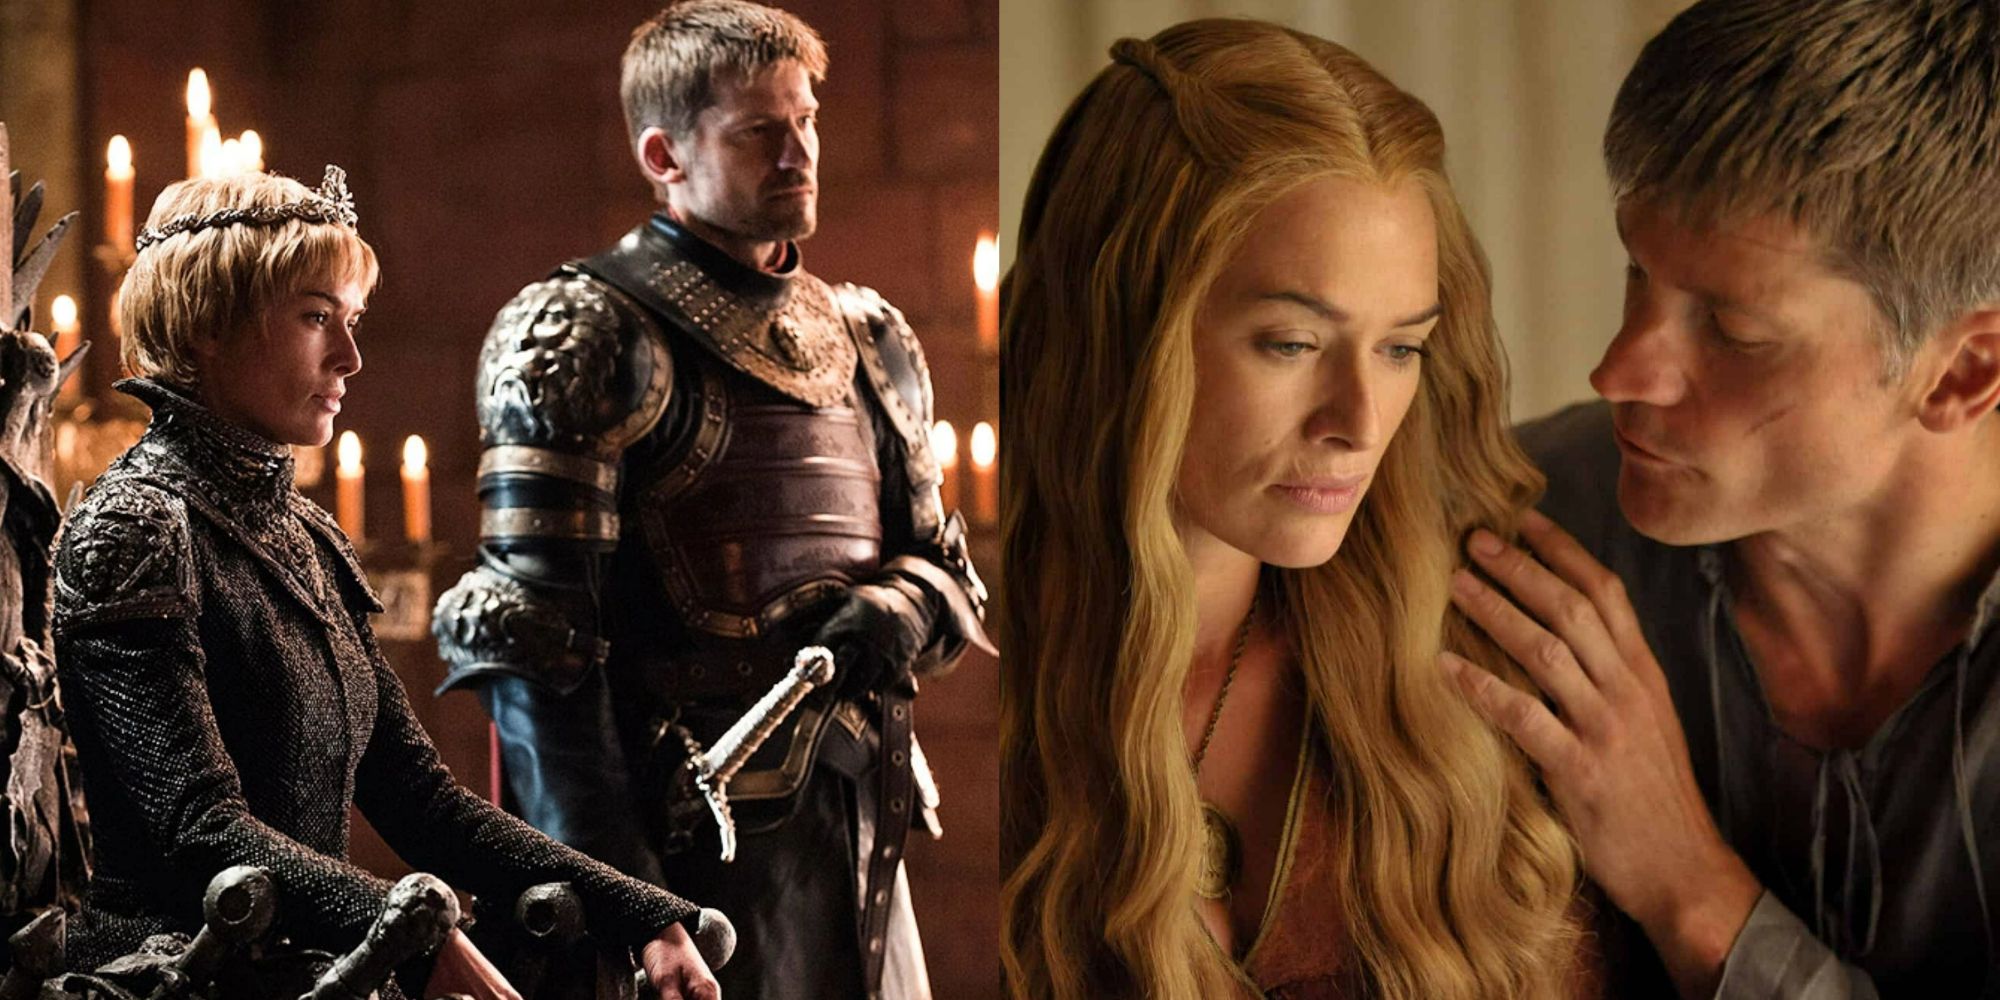 A split image showing Cersei and Jaime at the Iron Throne on the left and Jaime comforting Cersei on the right from Game of Thrones. 